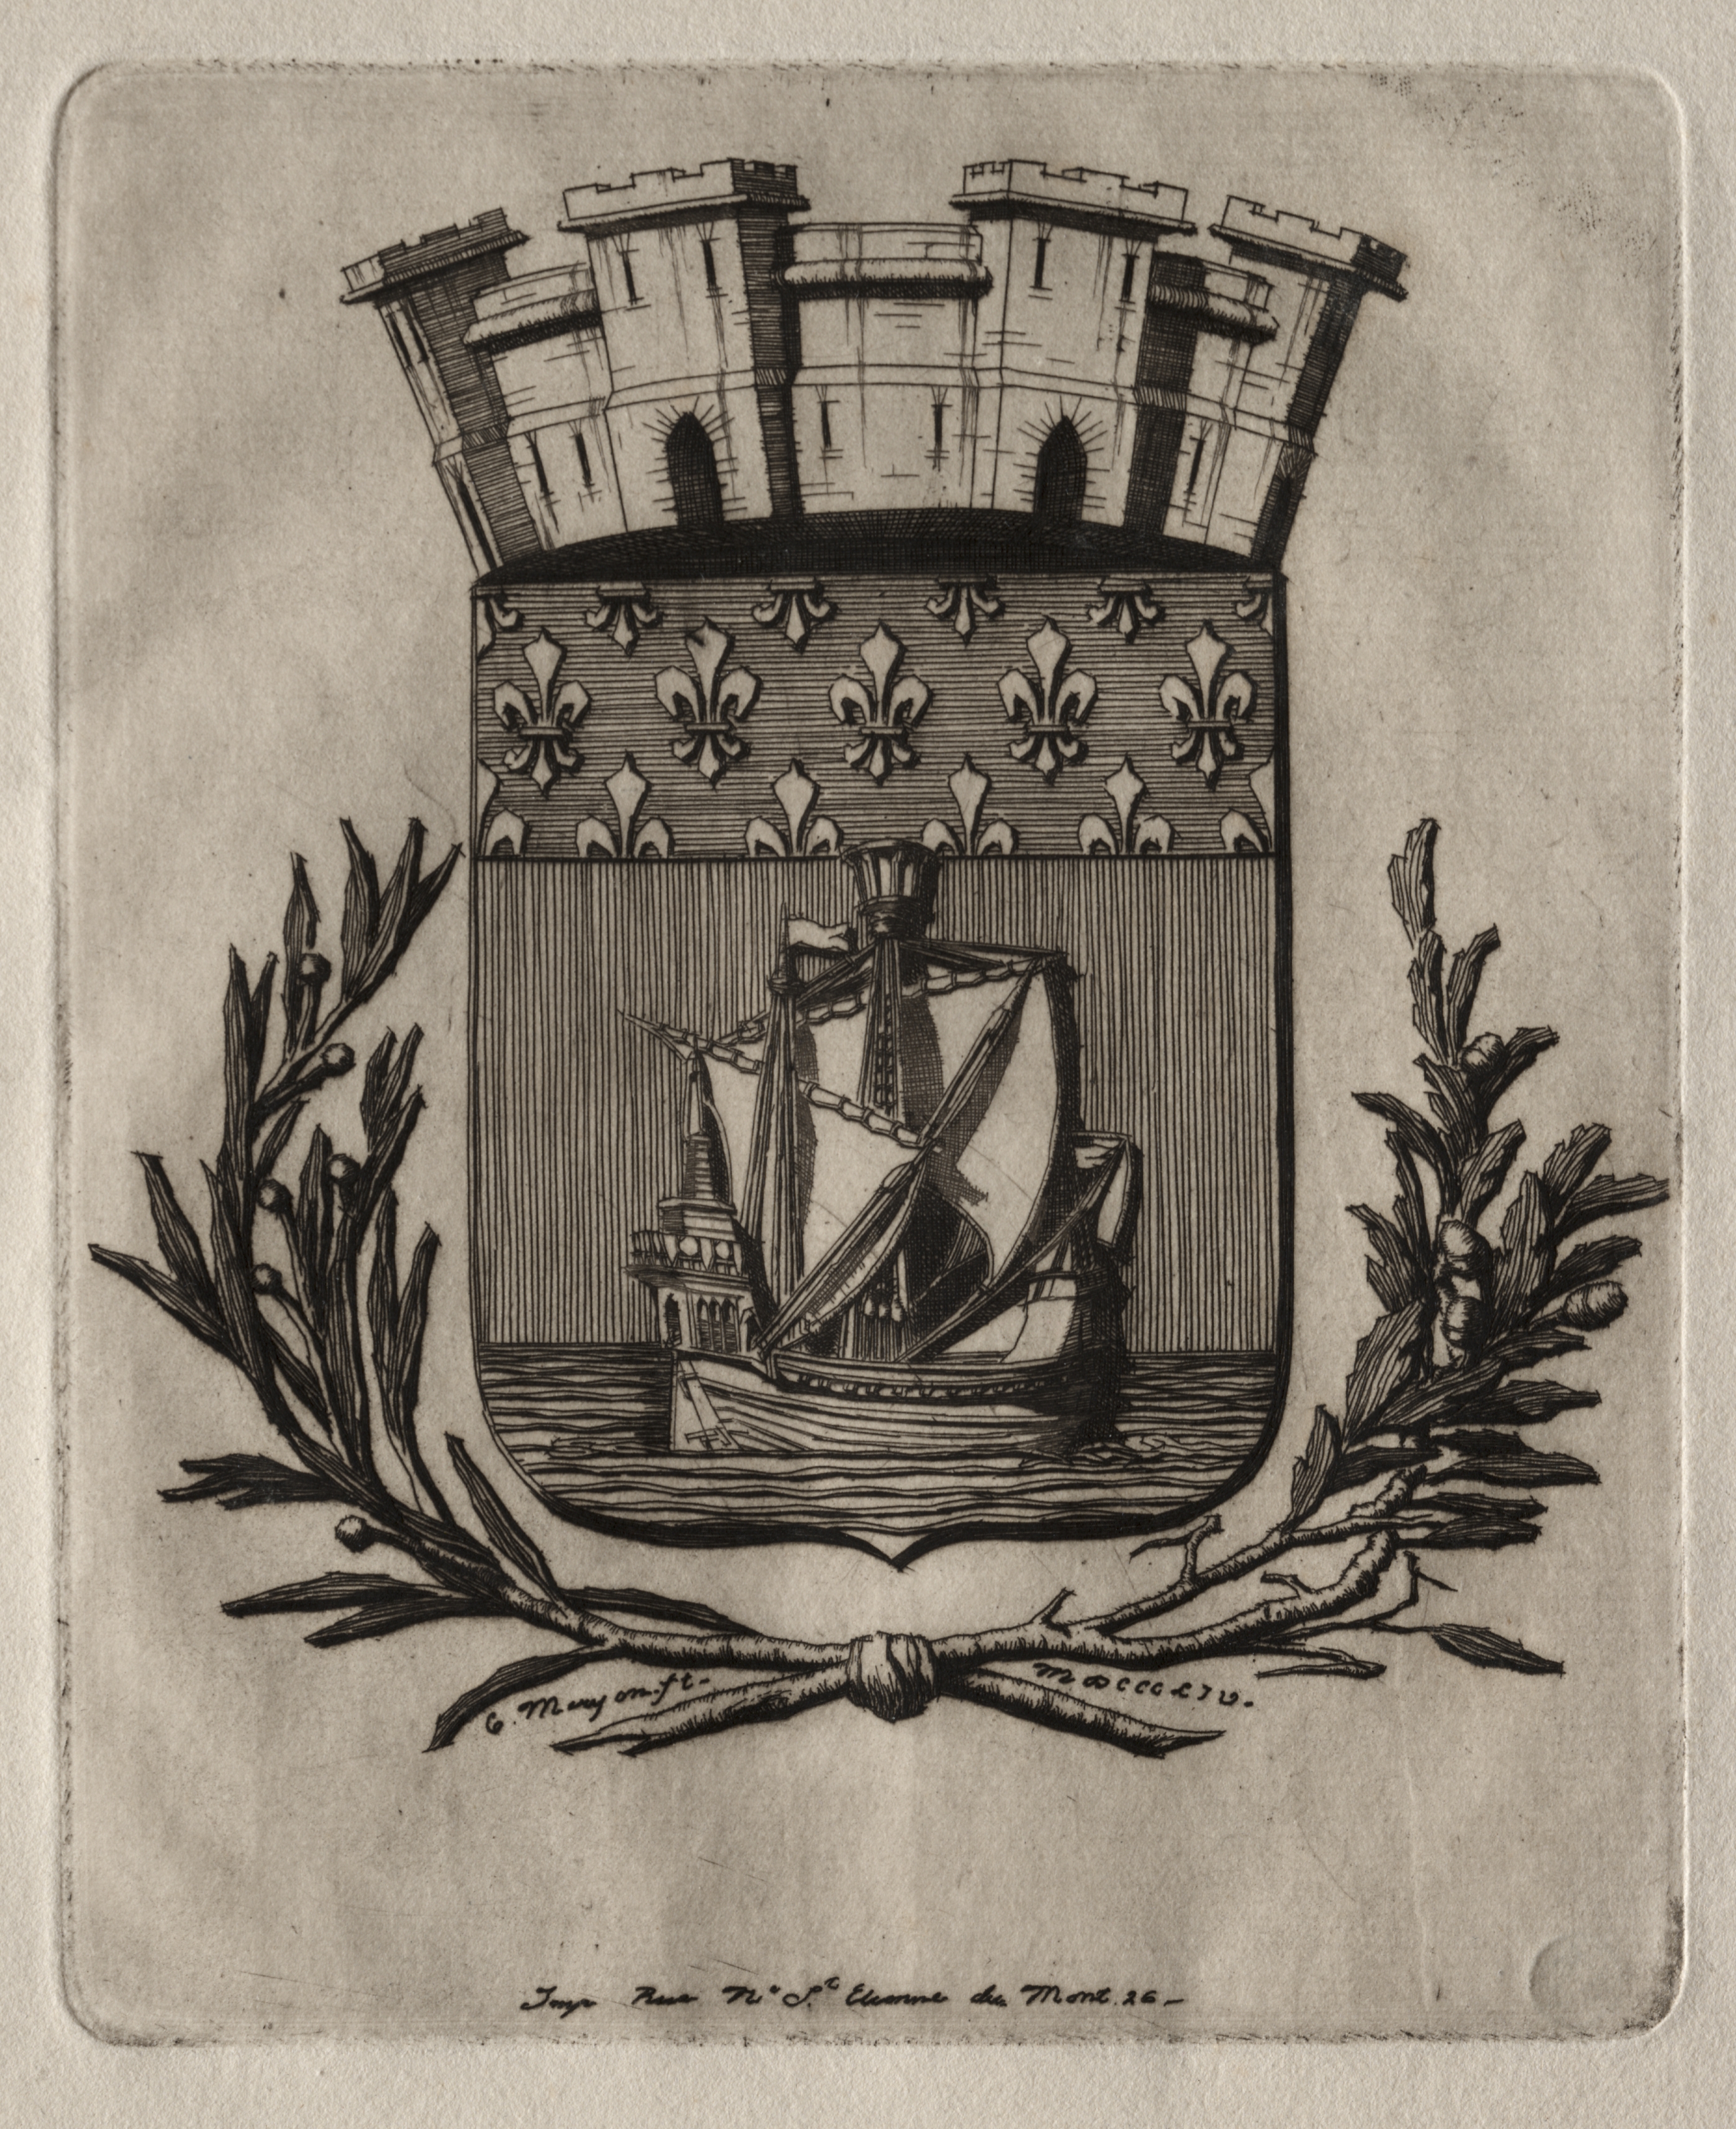 Etchings of Paris:  The Symbolical Arms of the City of Paris